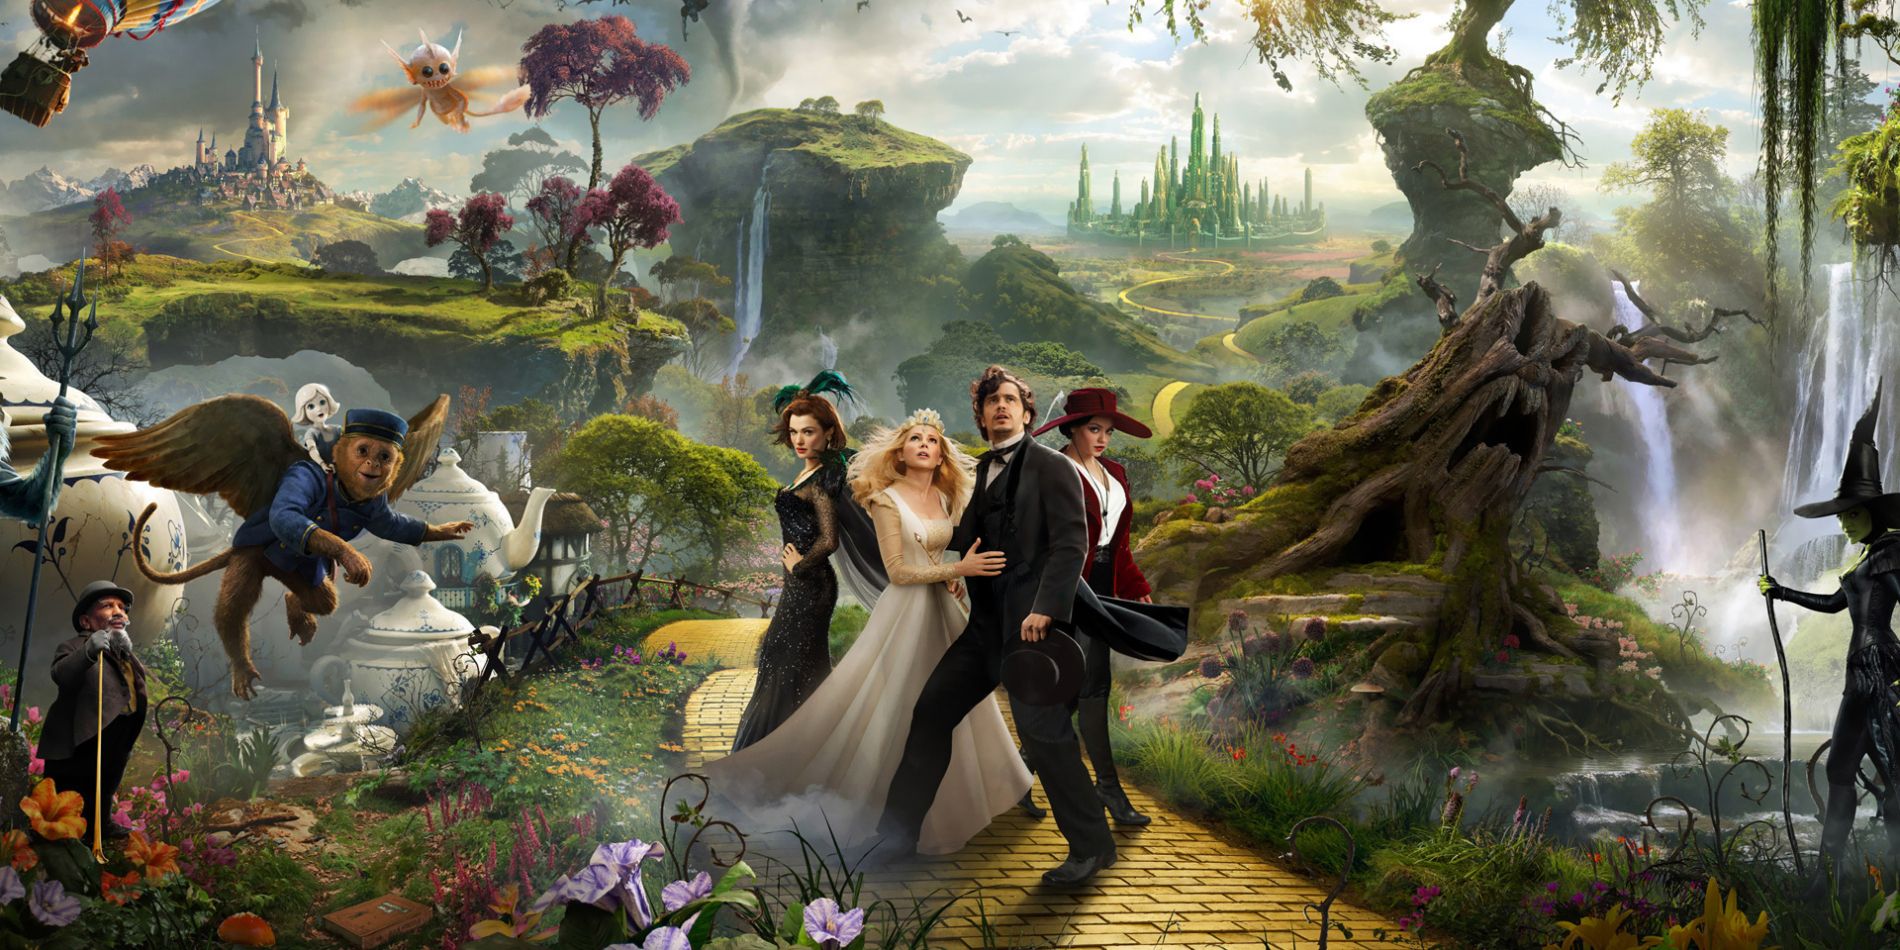 oz the great and powerful full movie watch